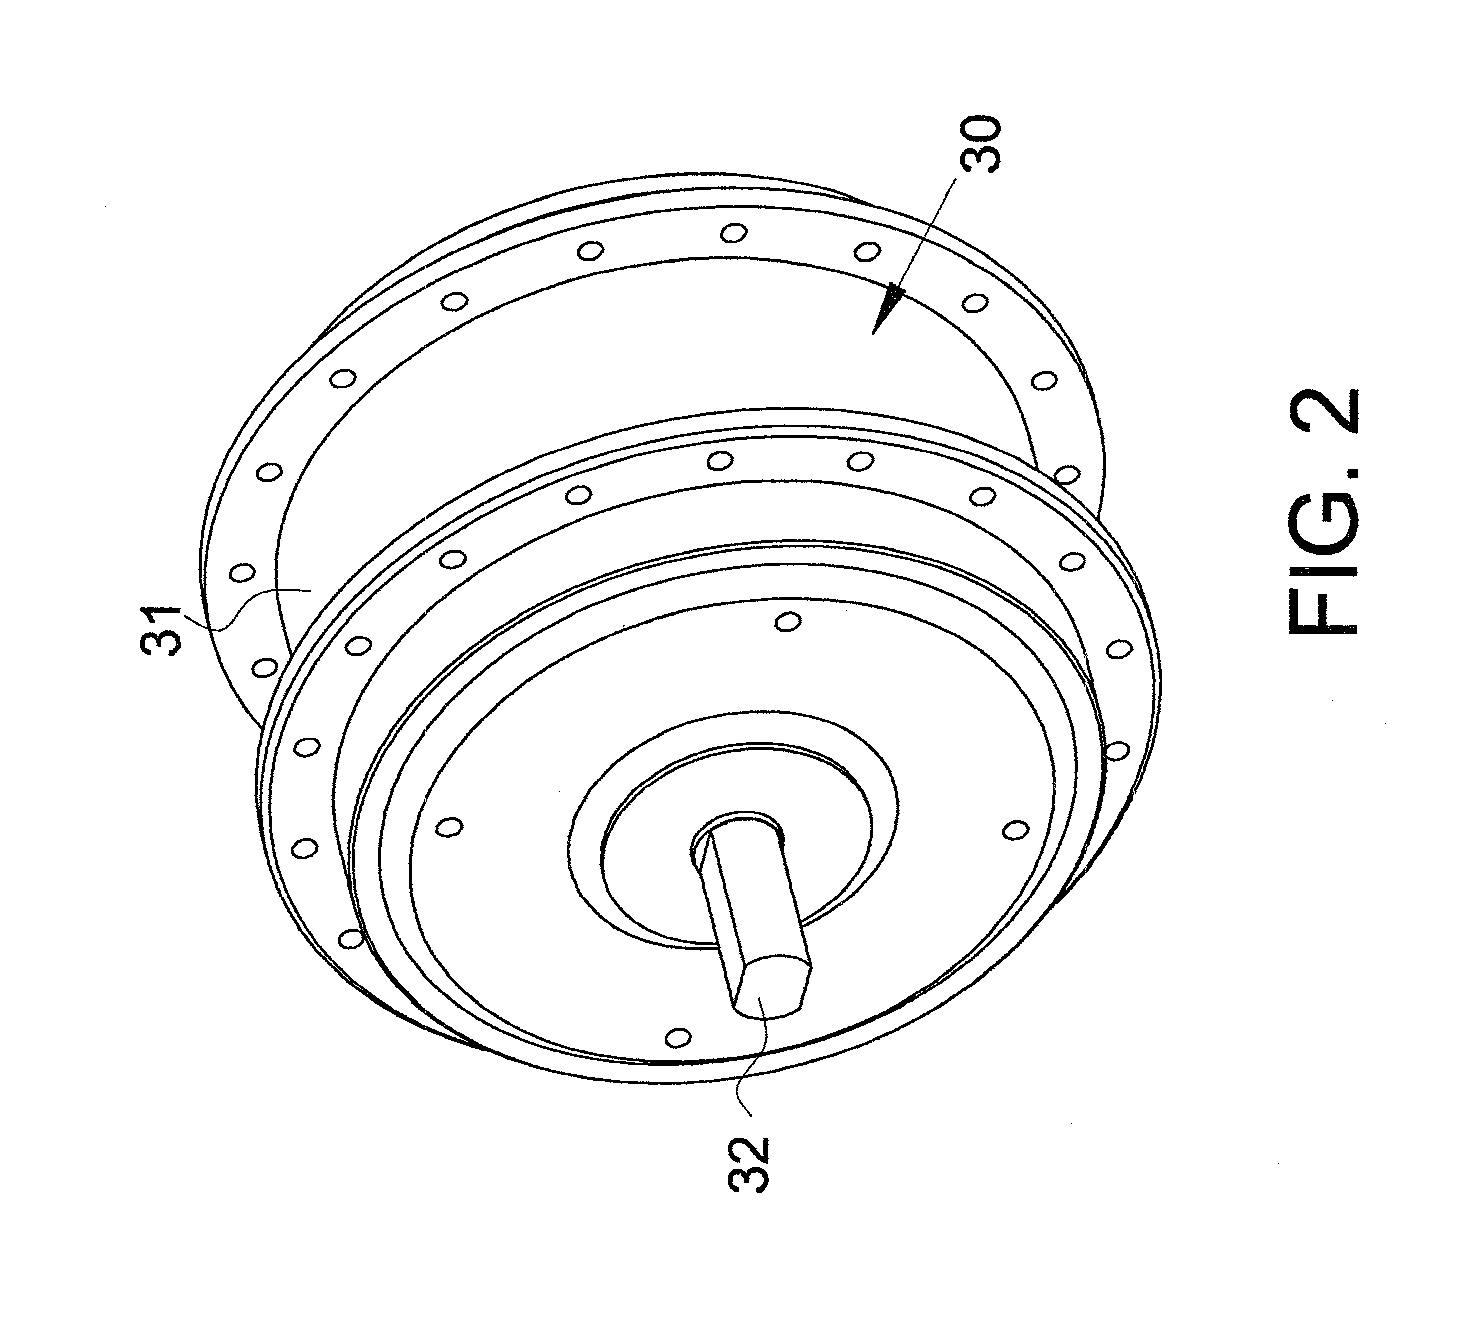 Hub motor for electric vehicles